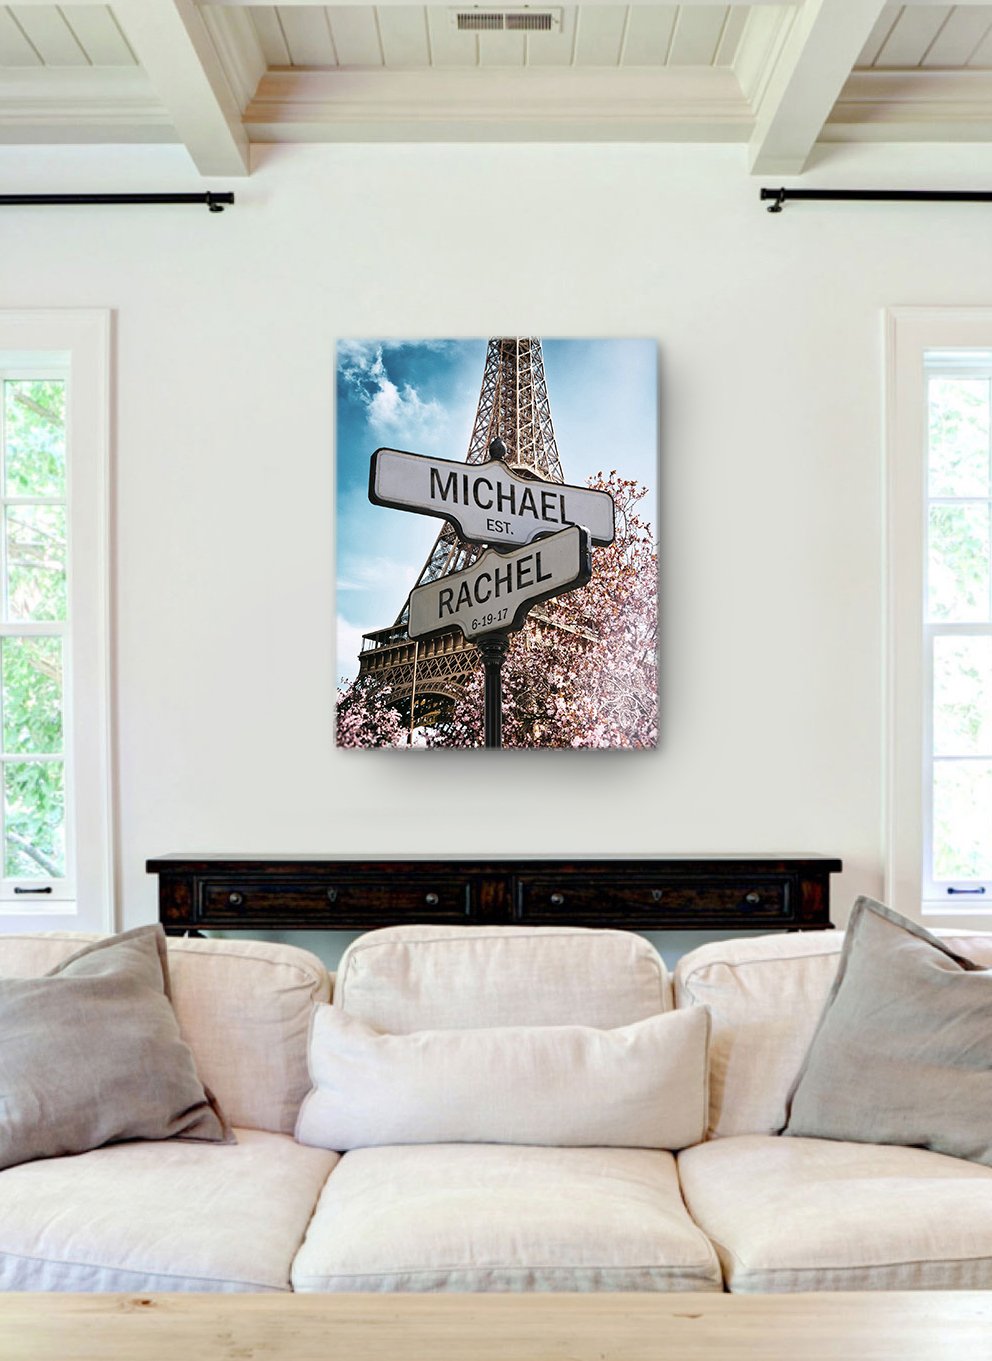 Personalized paintings – Canvas Home Design